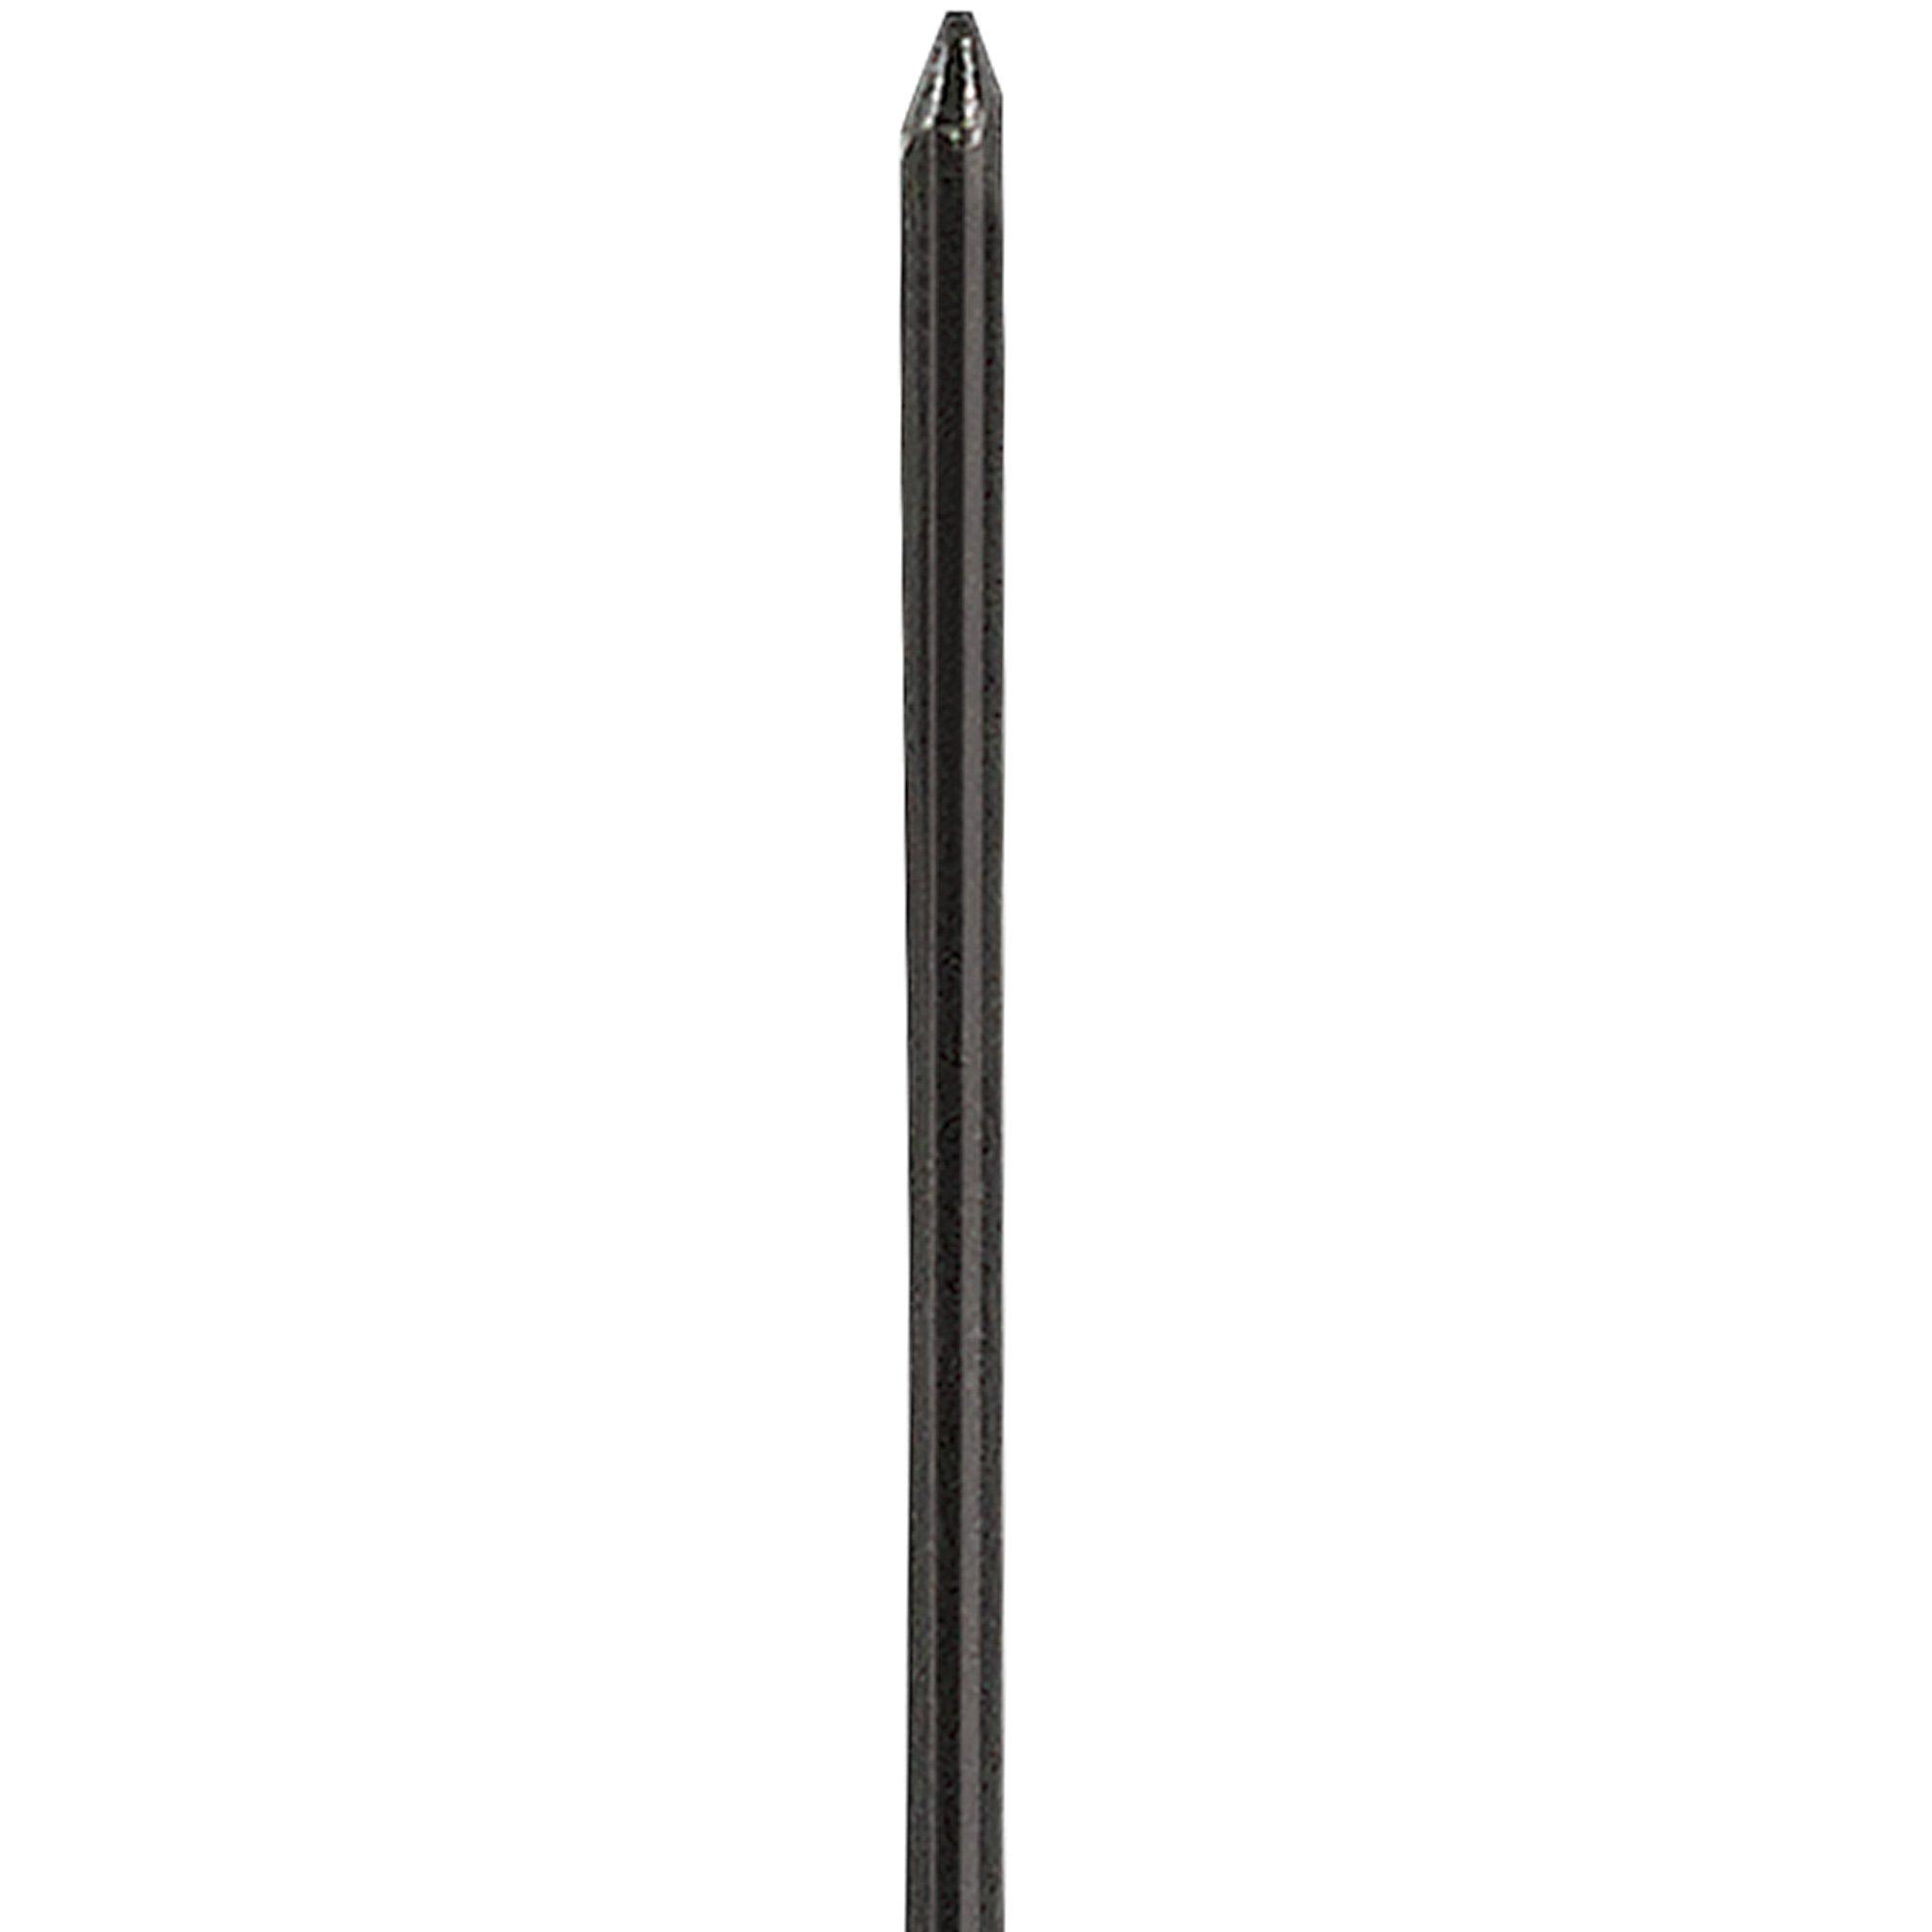 Tombstone Metal Stakes 6ct